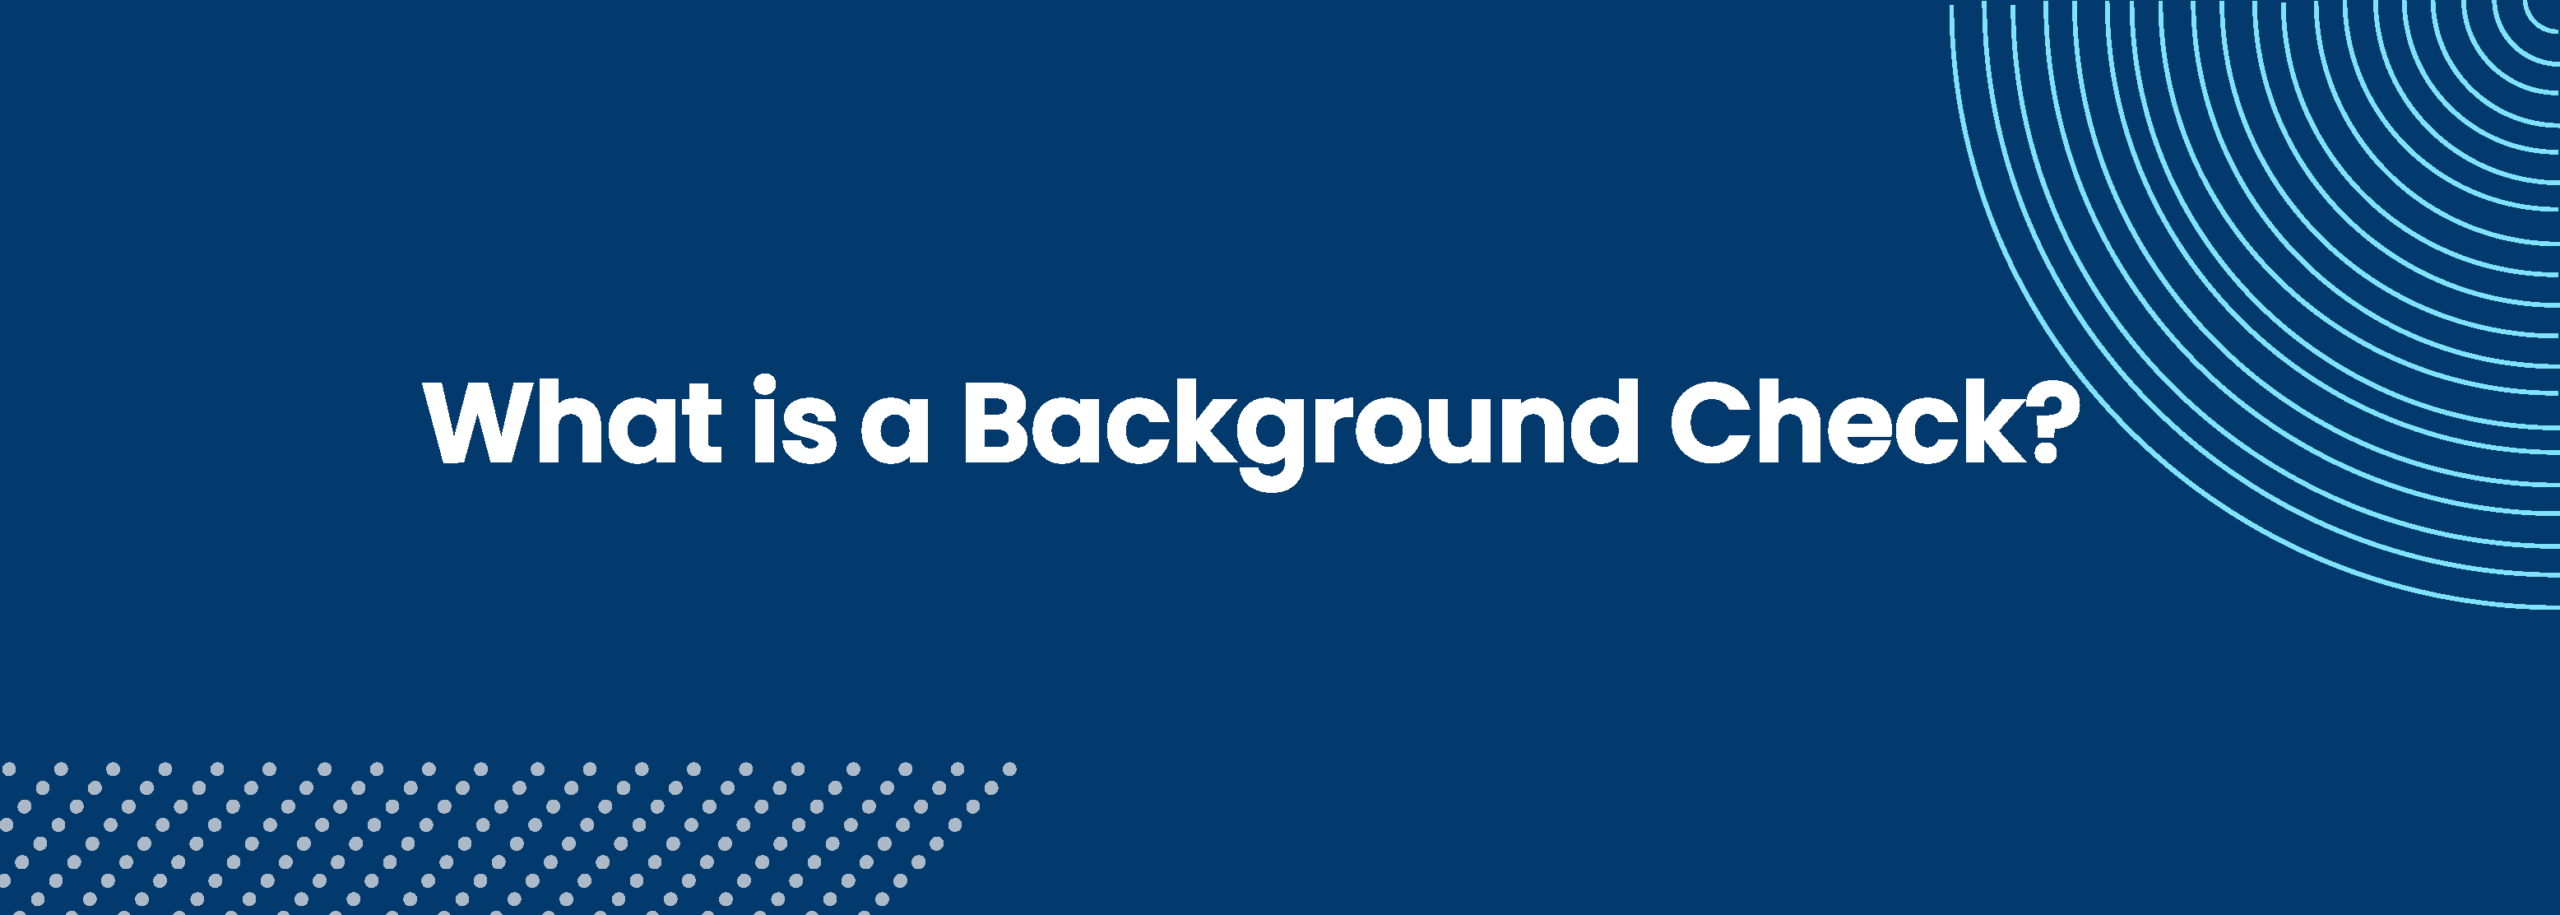 A background check is a method to confirm an individual's identity using financial, criminal, and commercial data. 